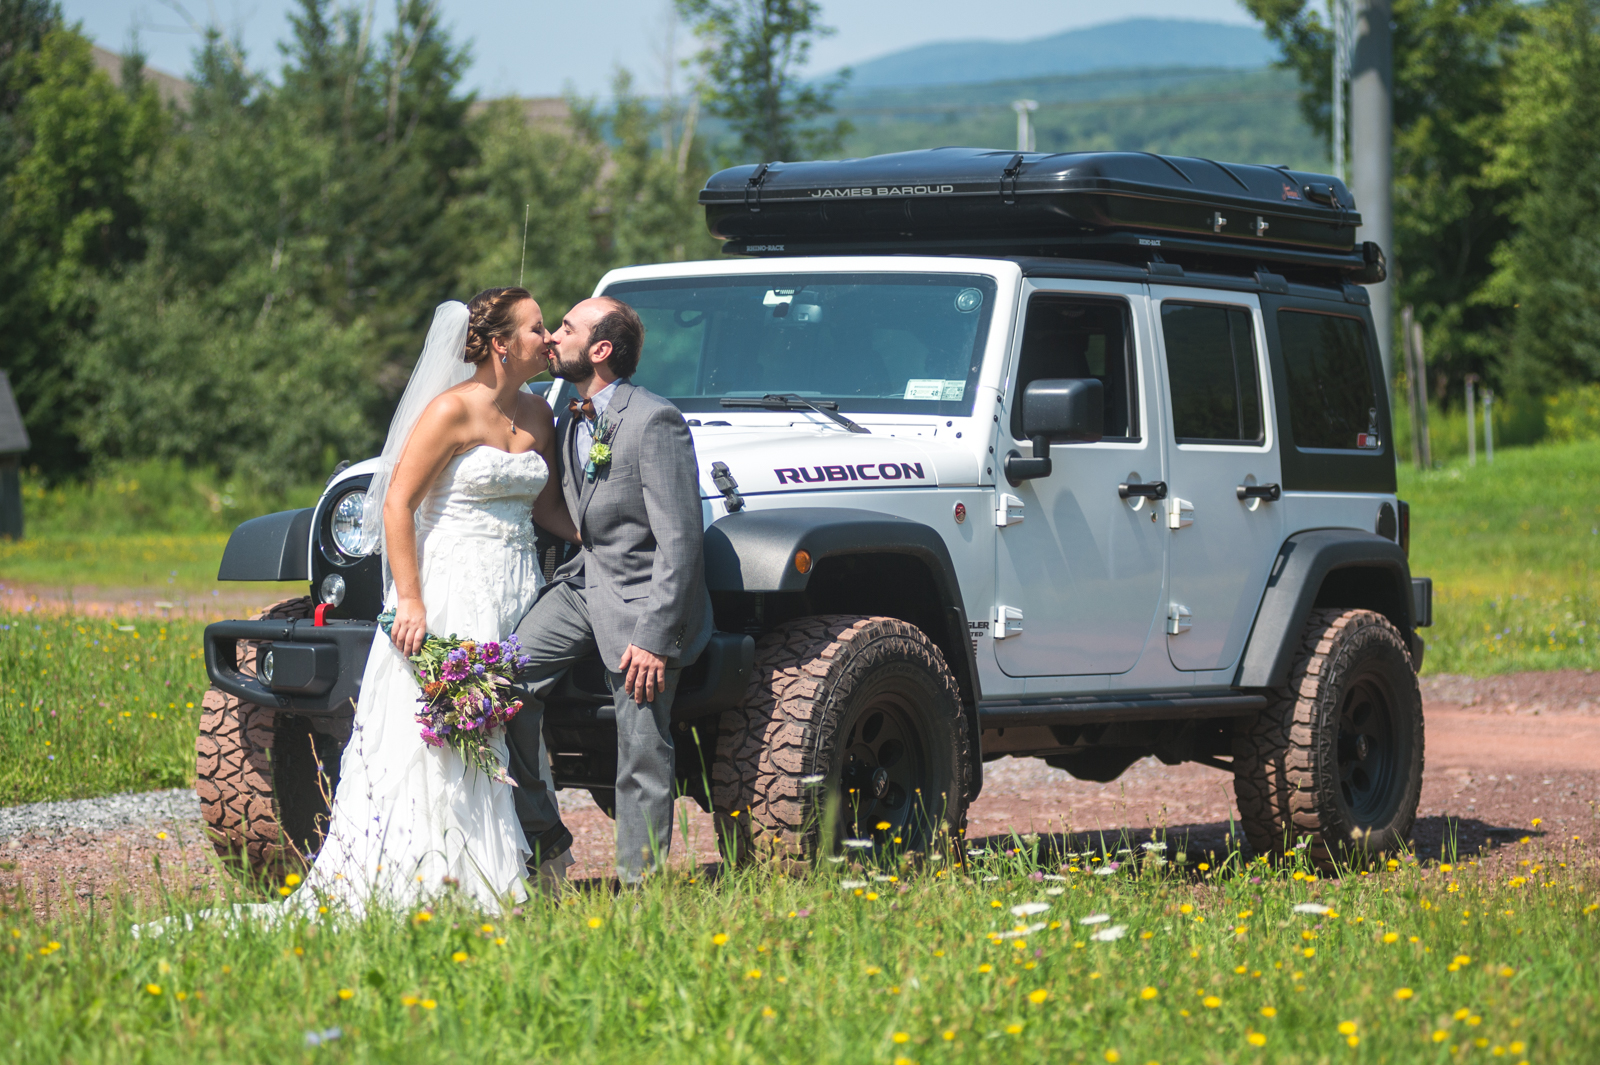 Bride, Groom and Jeep